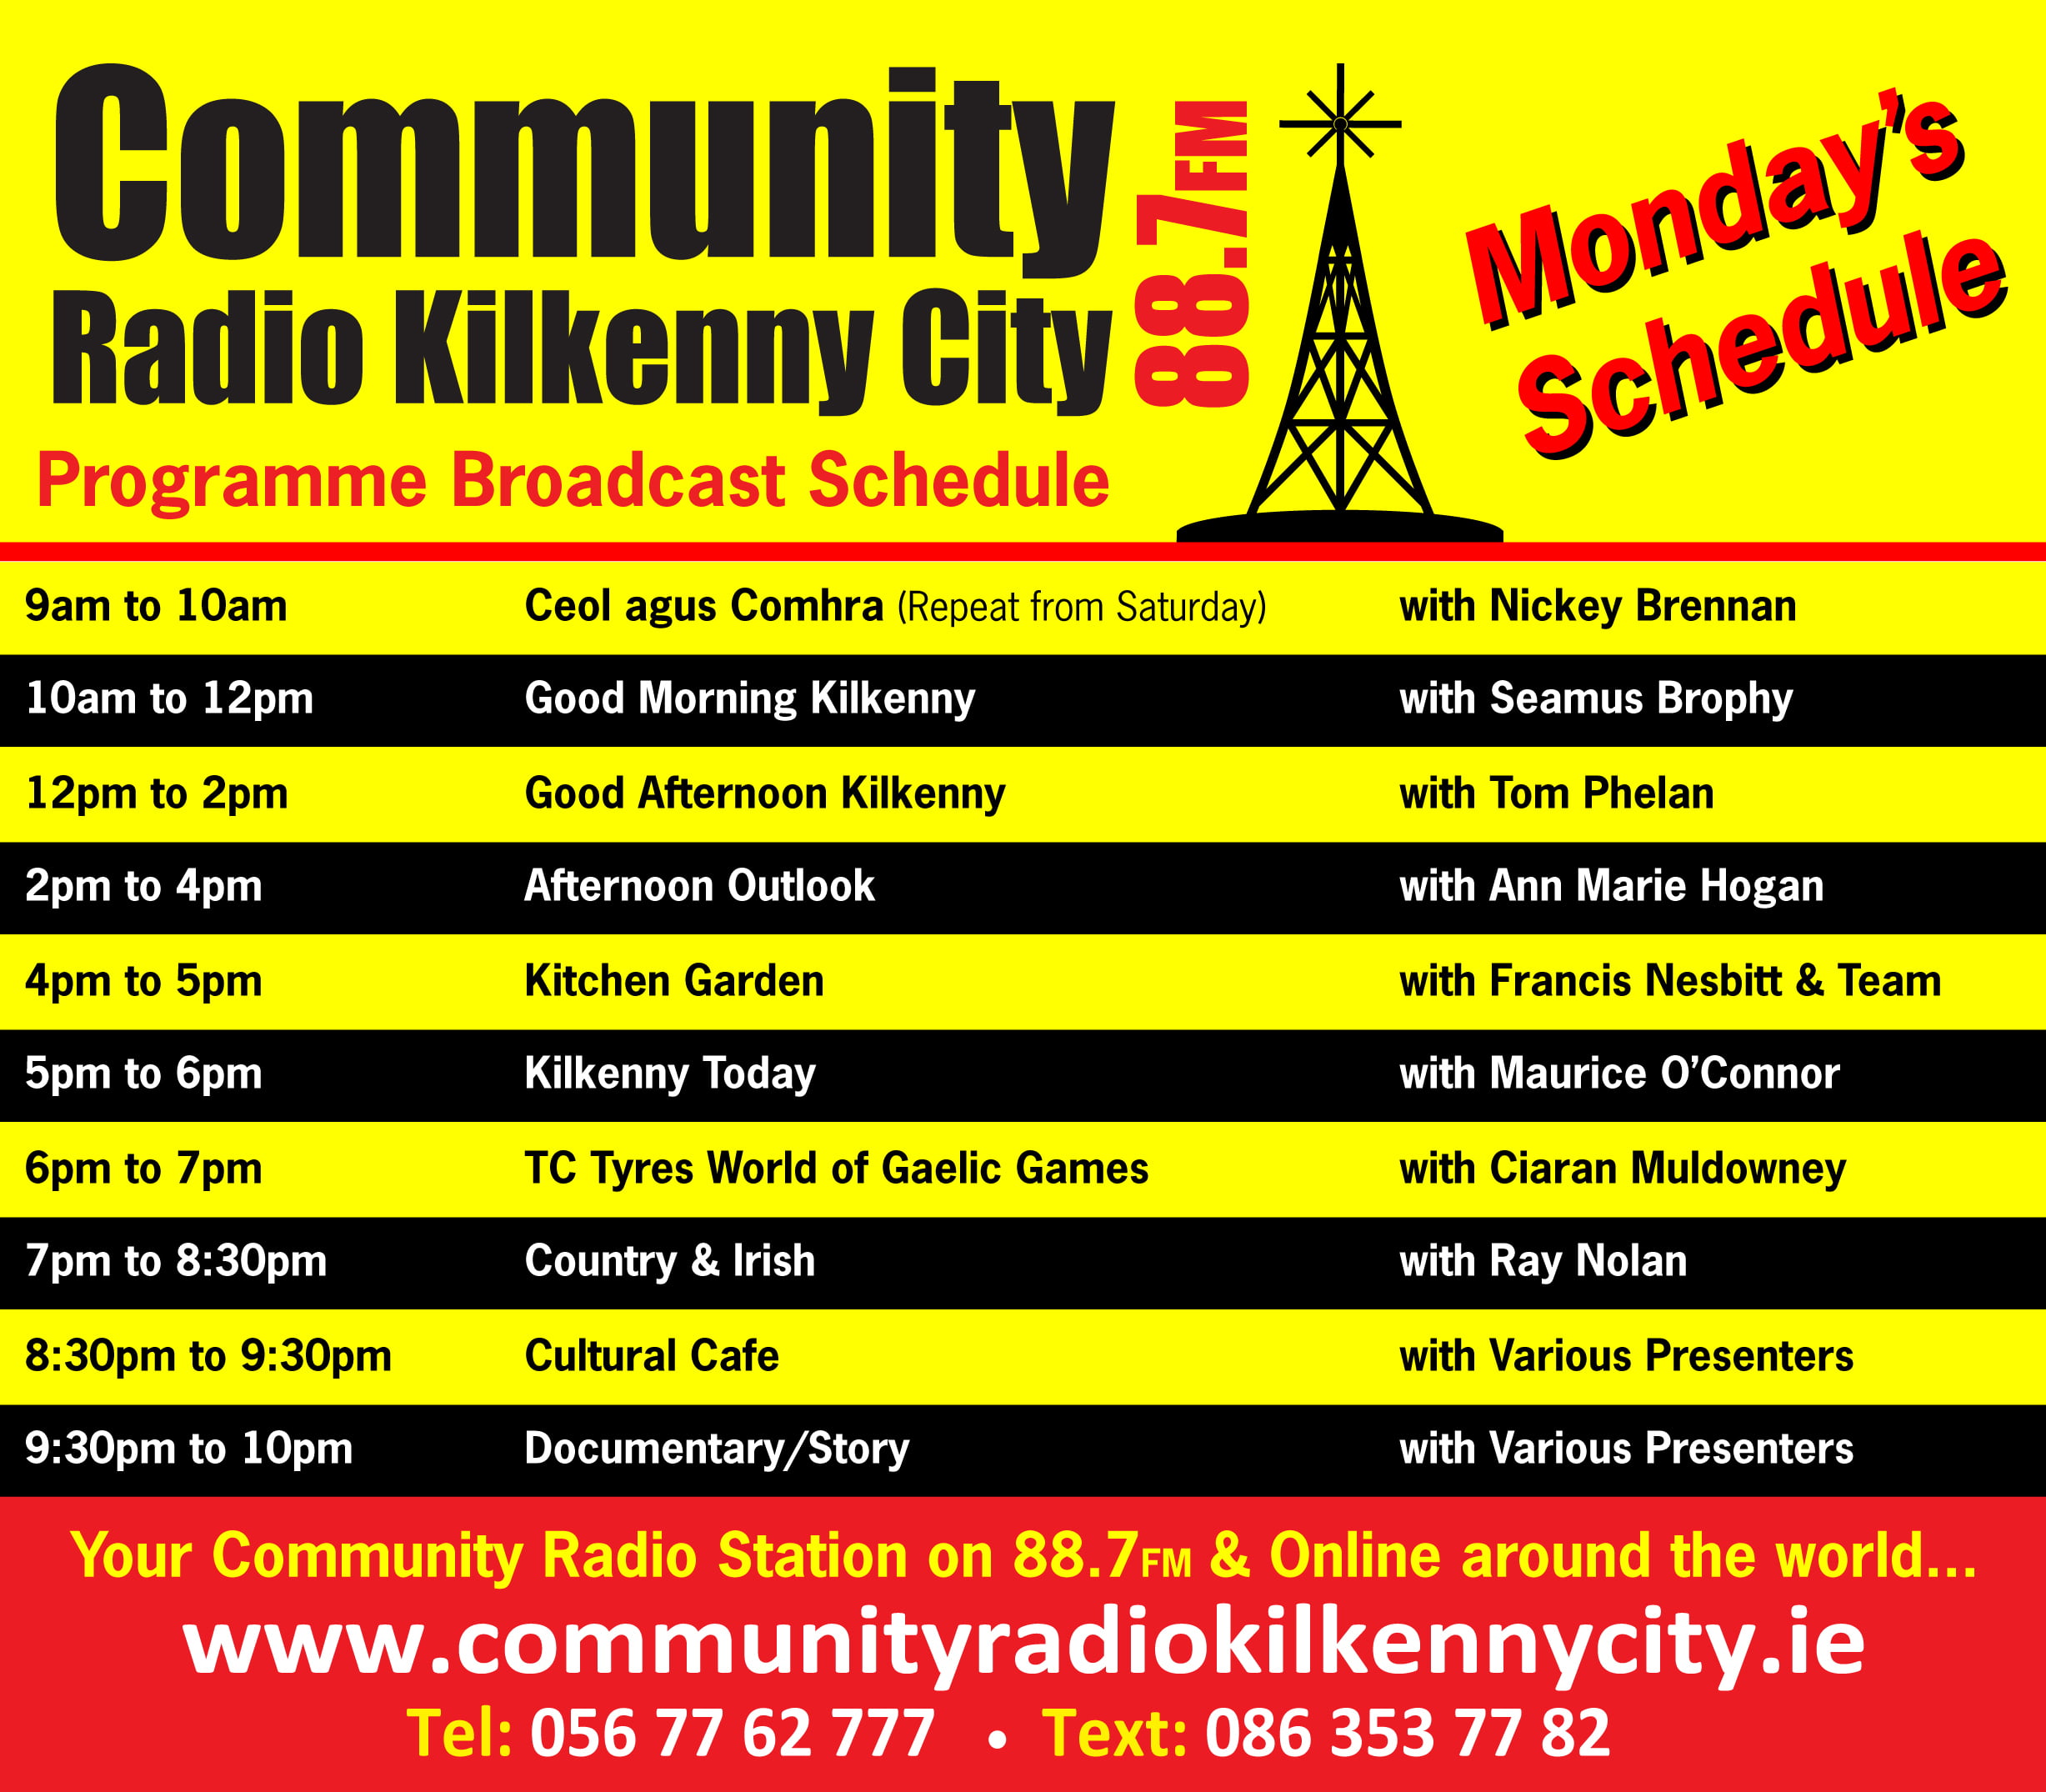 Have a look at our new Schedule kicking off from Monday May 6th